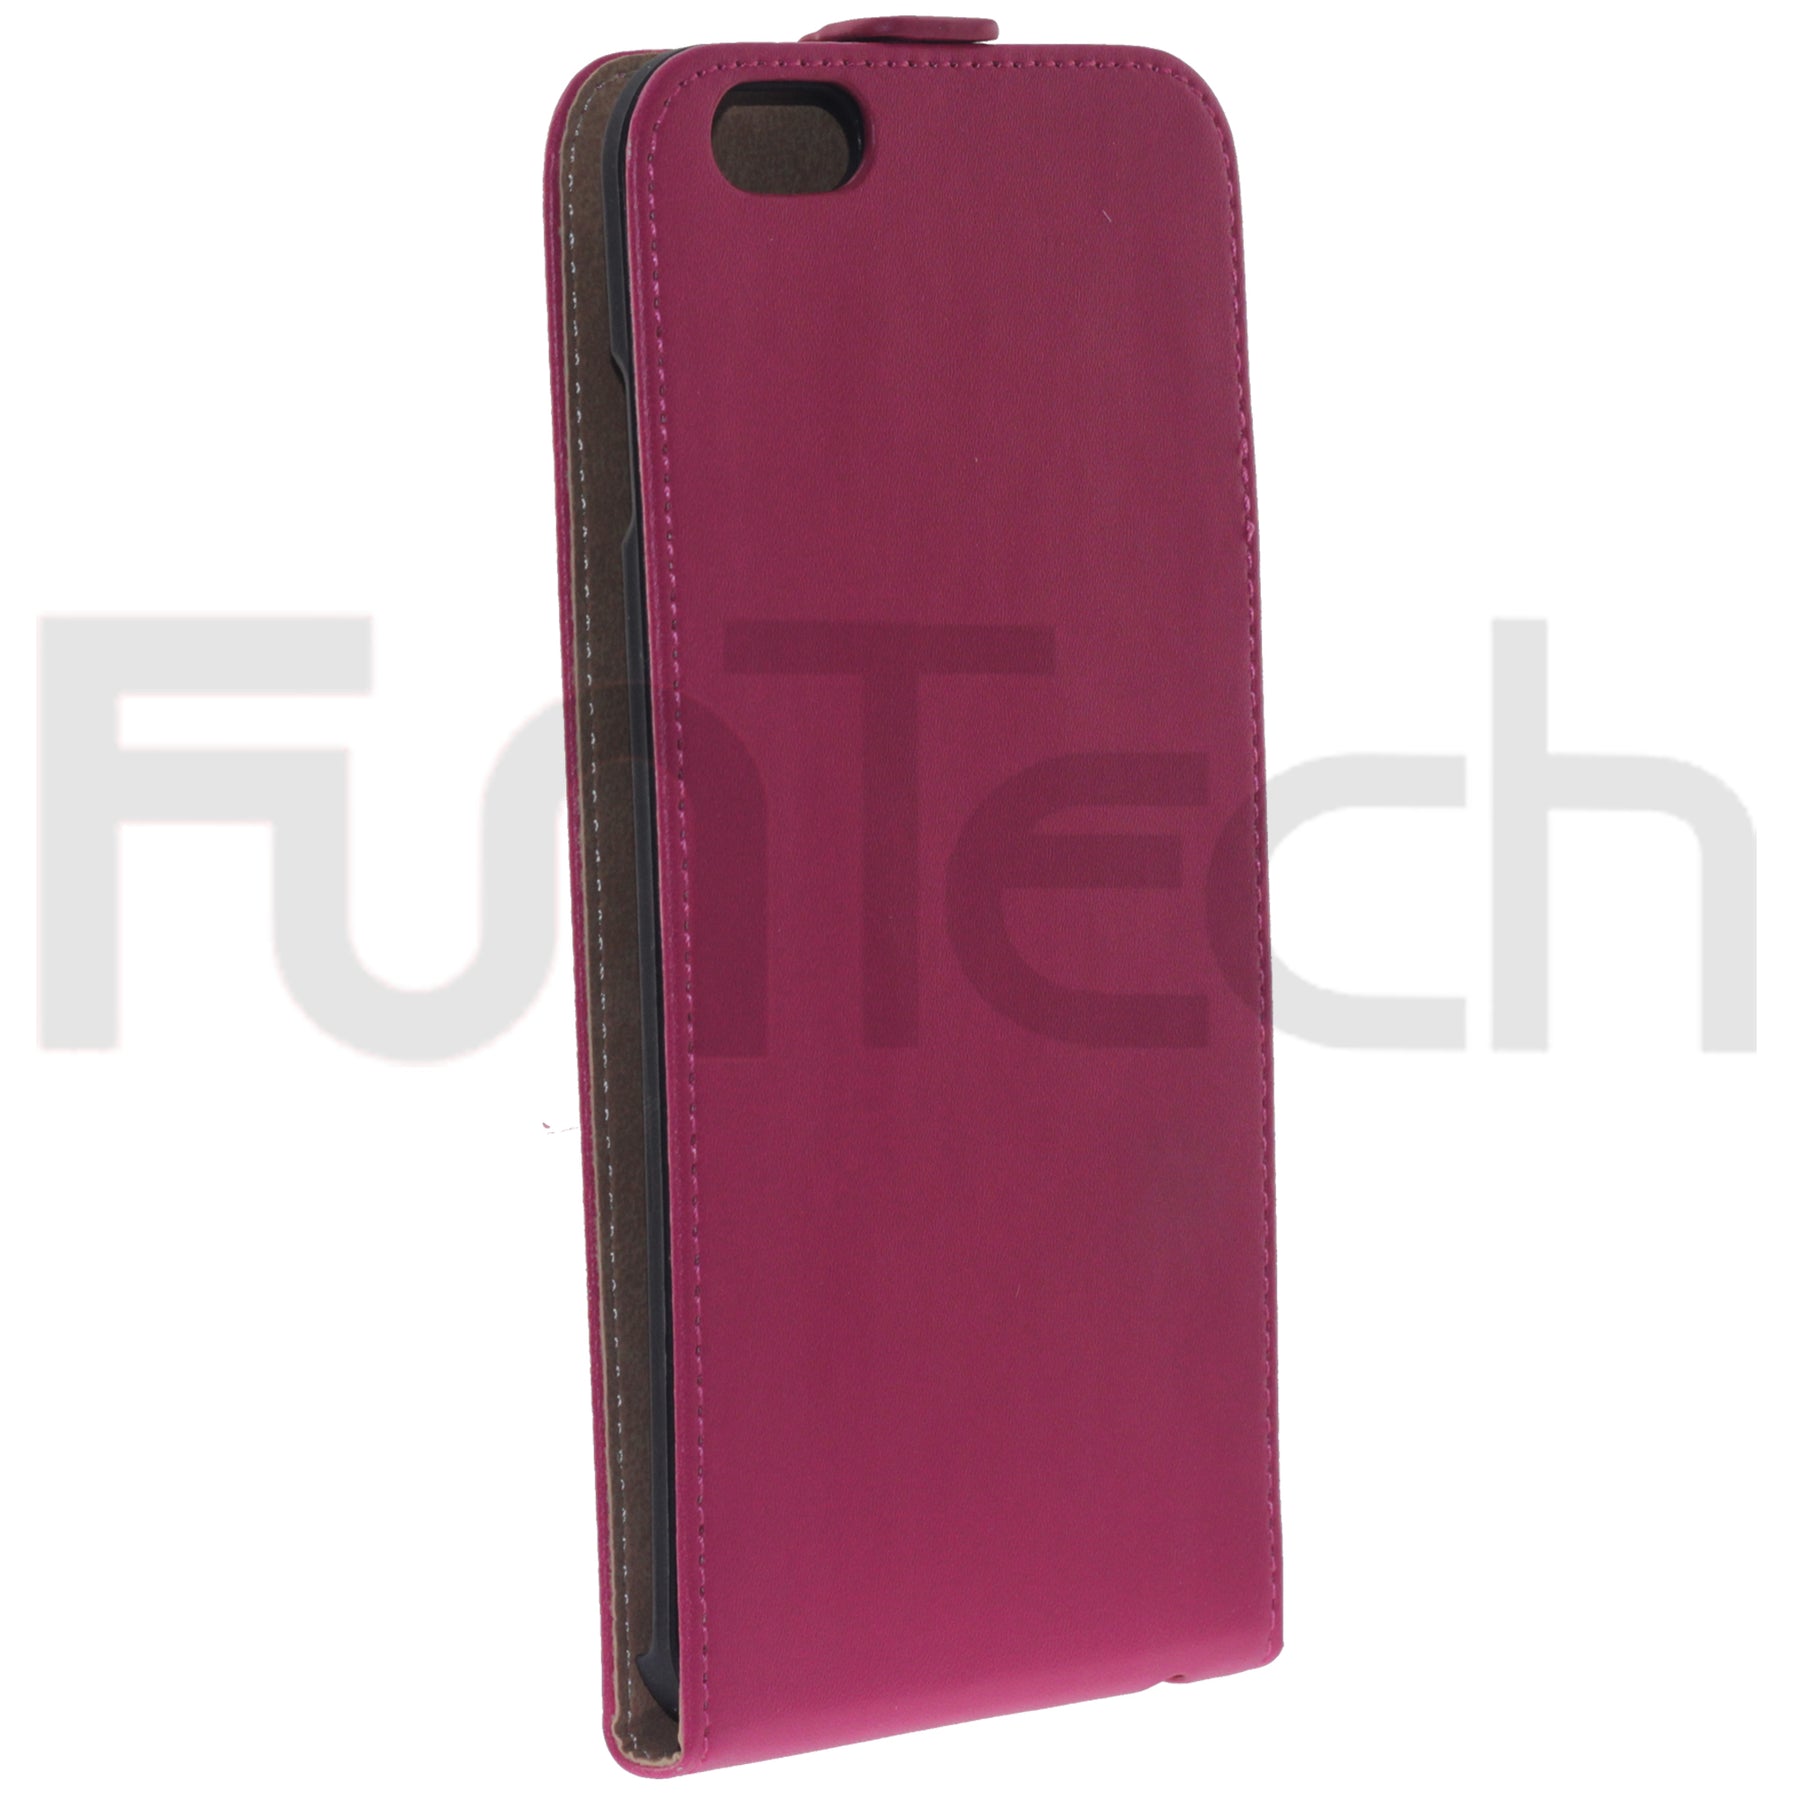 Apple, iPhone 6S, 5.5", Case, Color Pink.